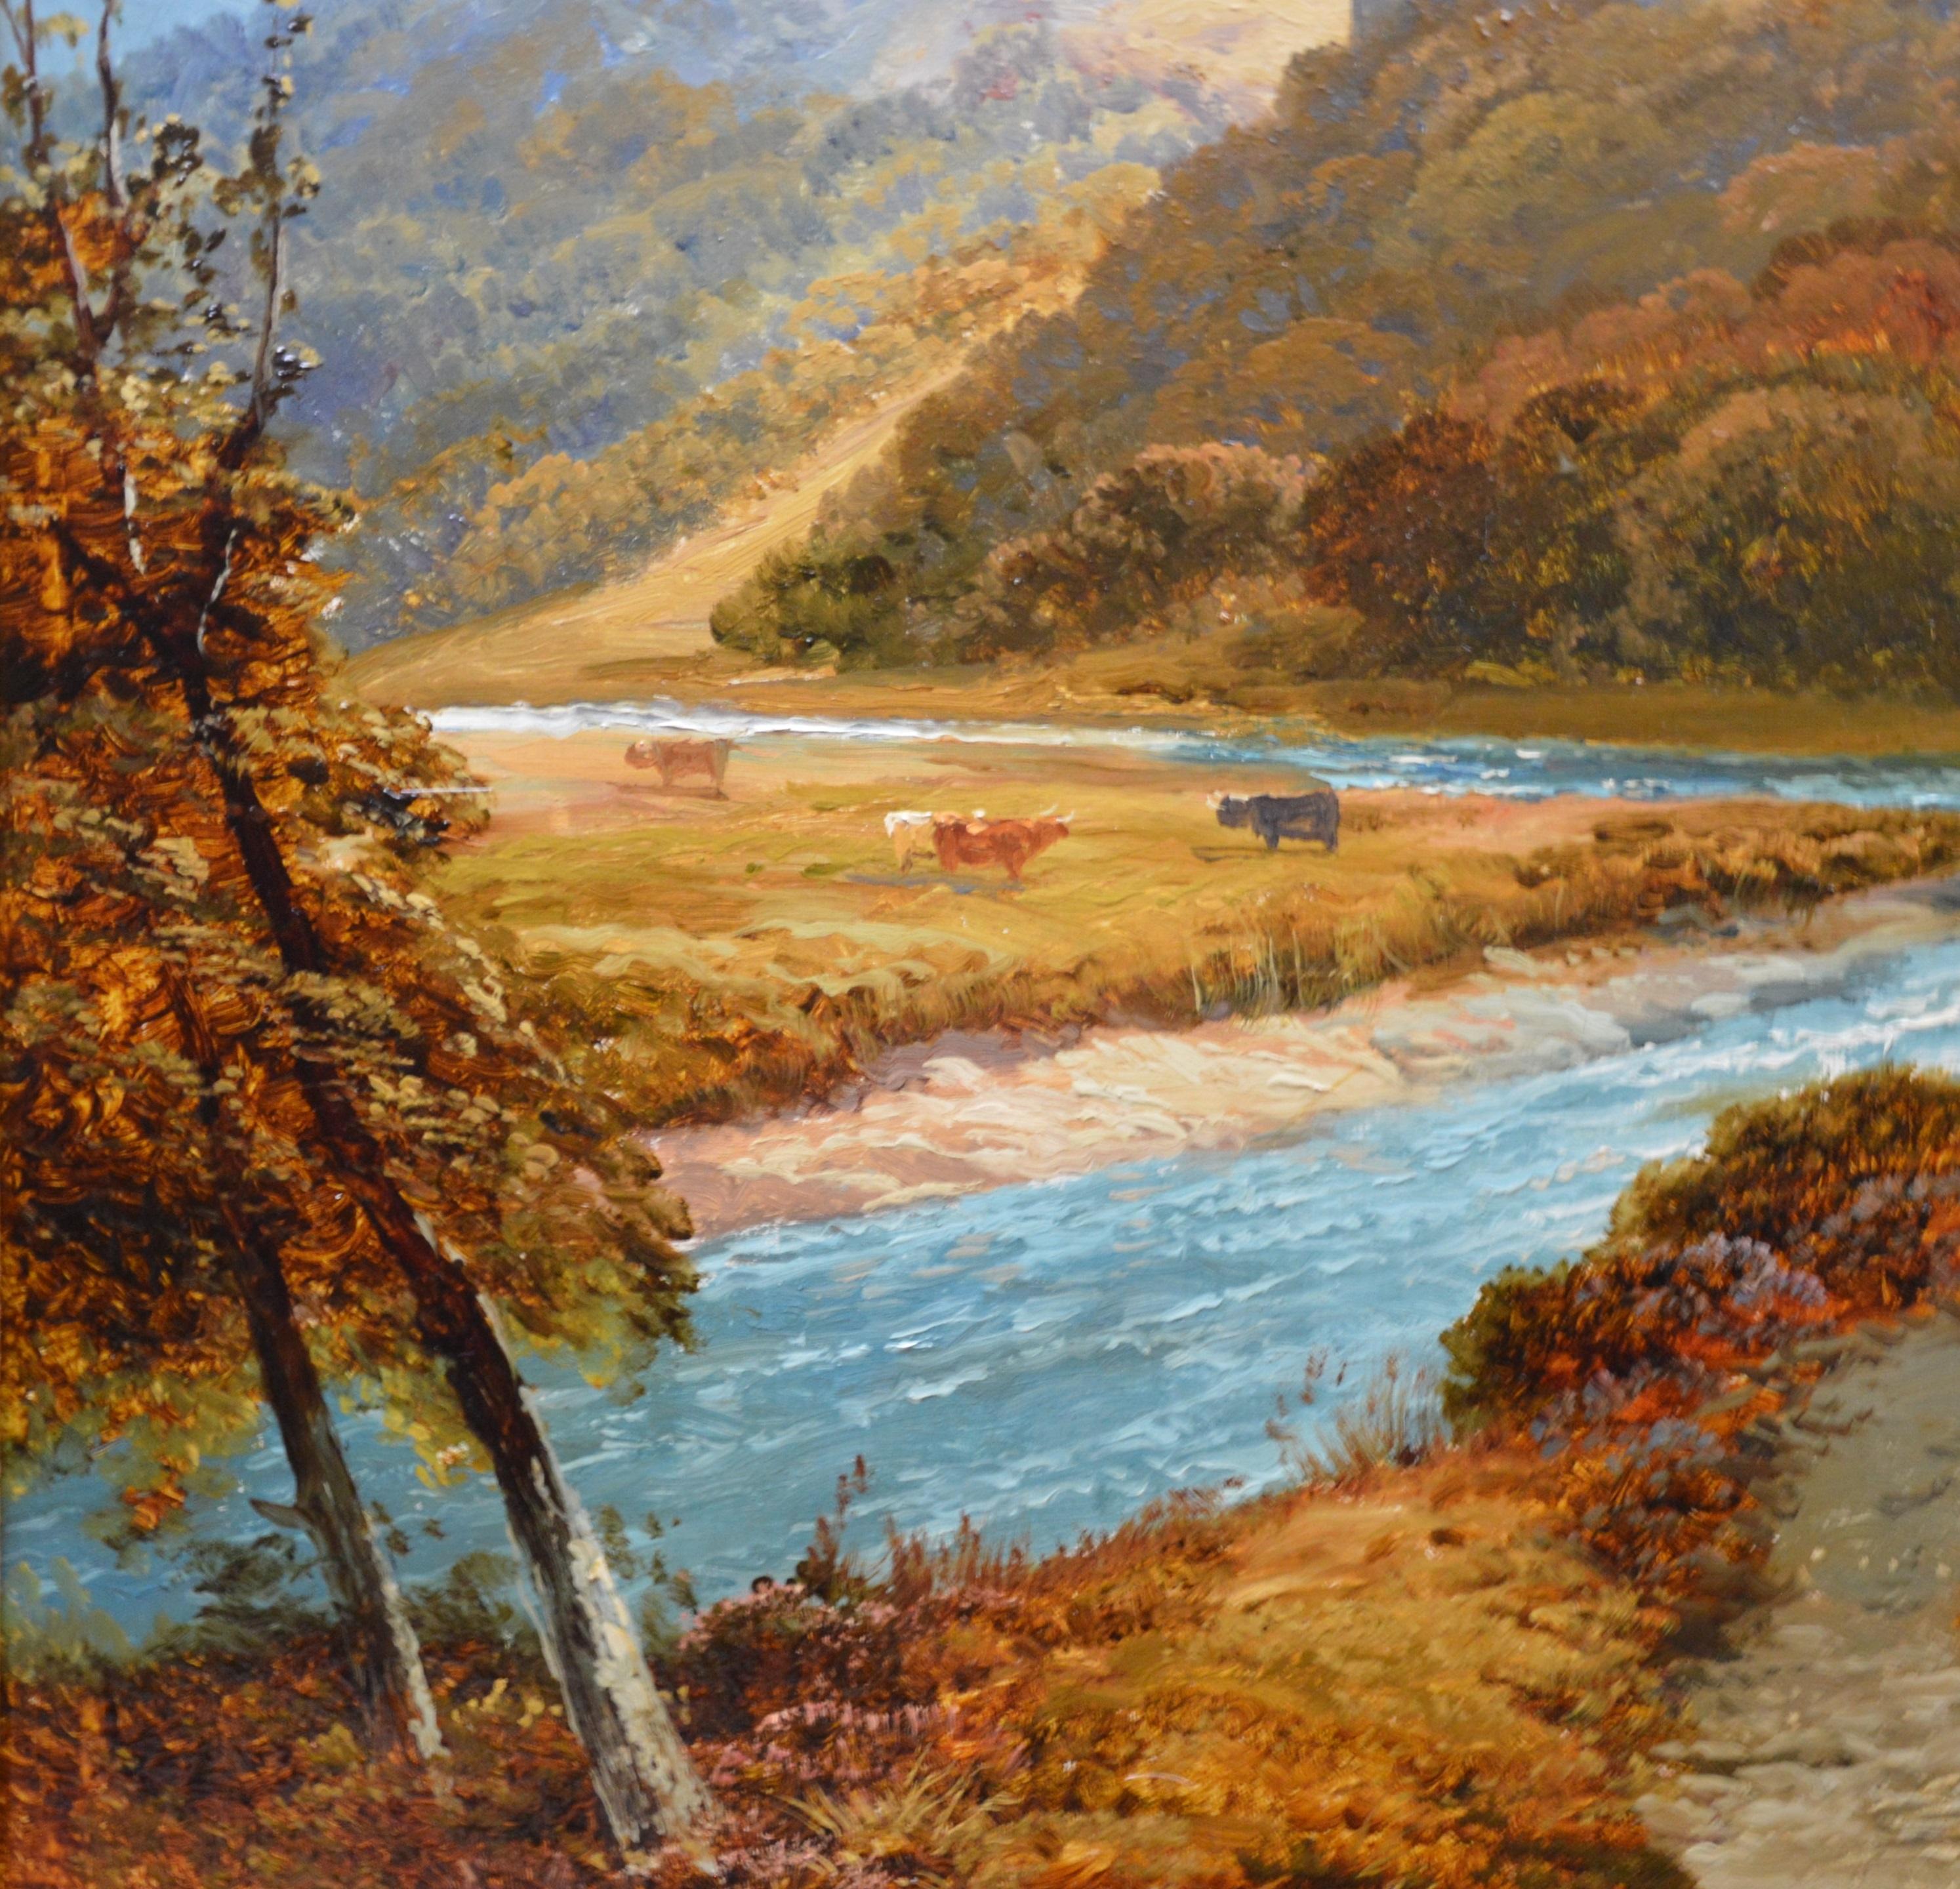 On the River Dee - Large 19th Century Scottish Landscape Oil Painting  1